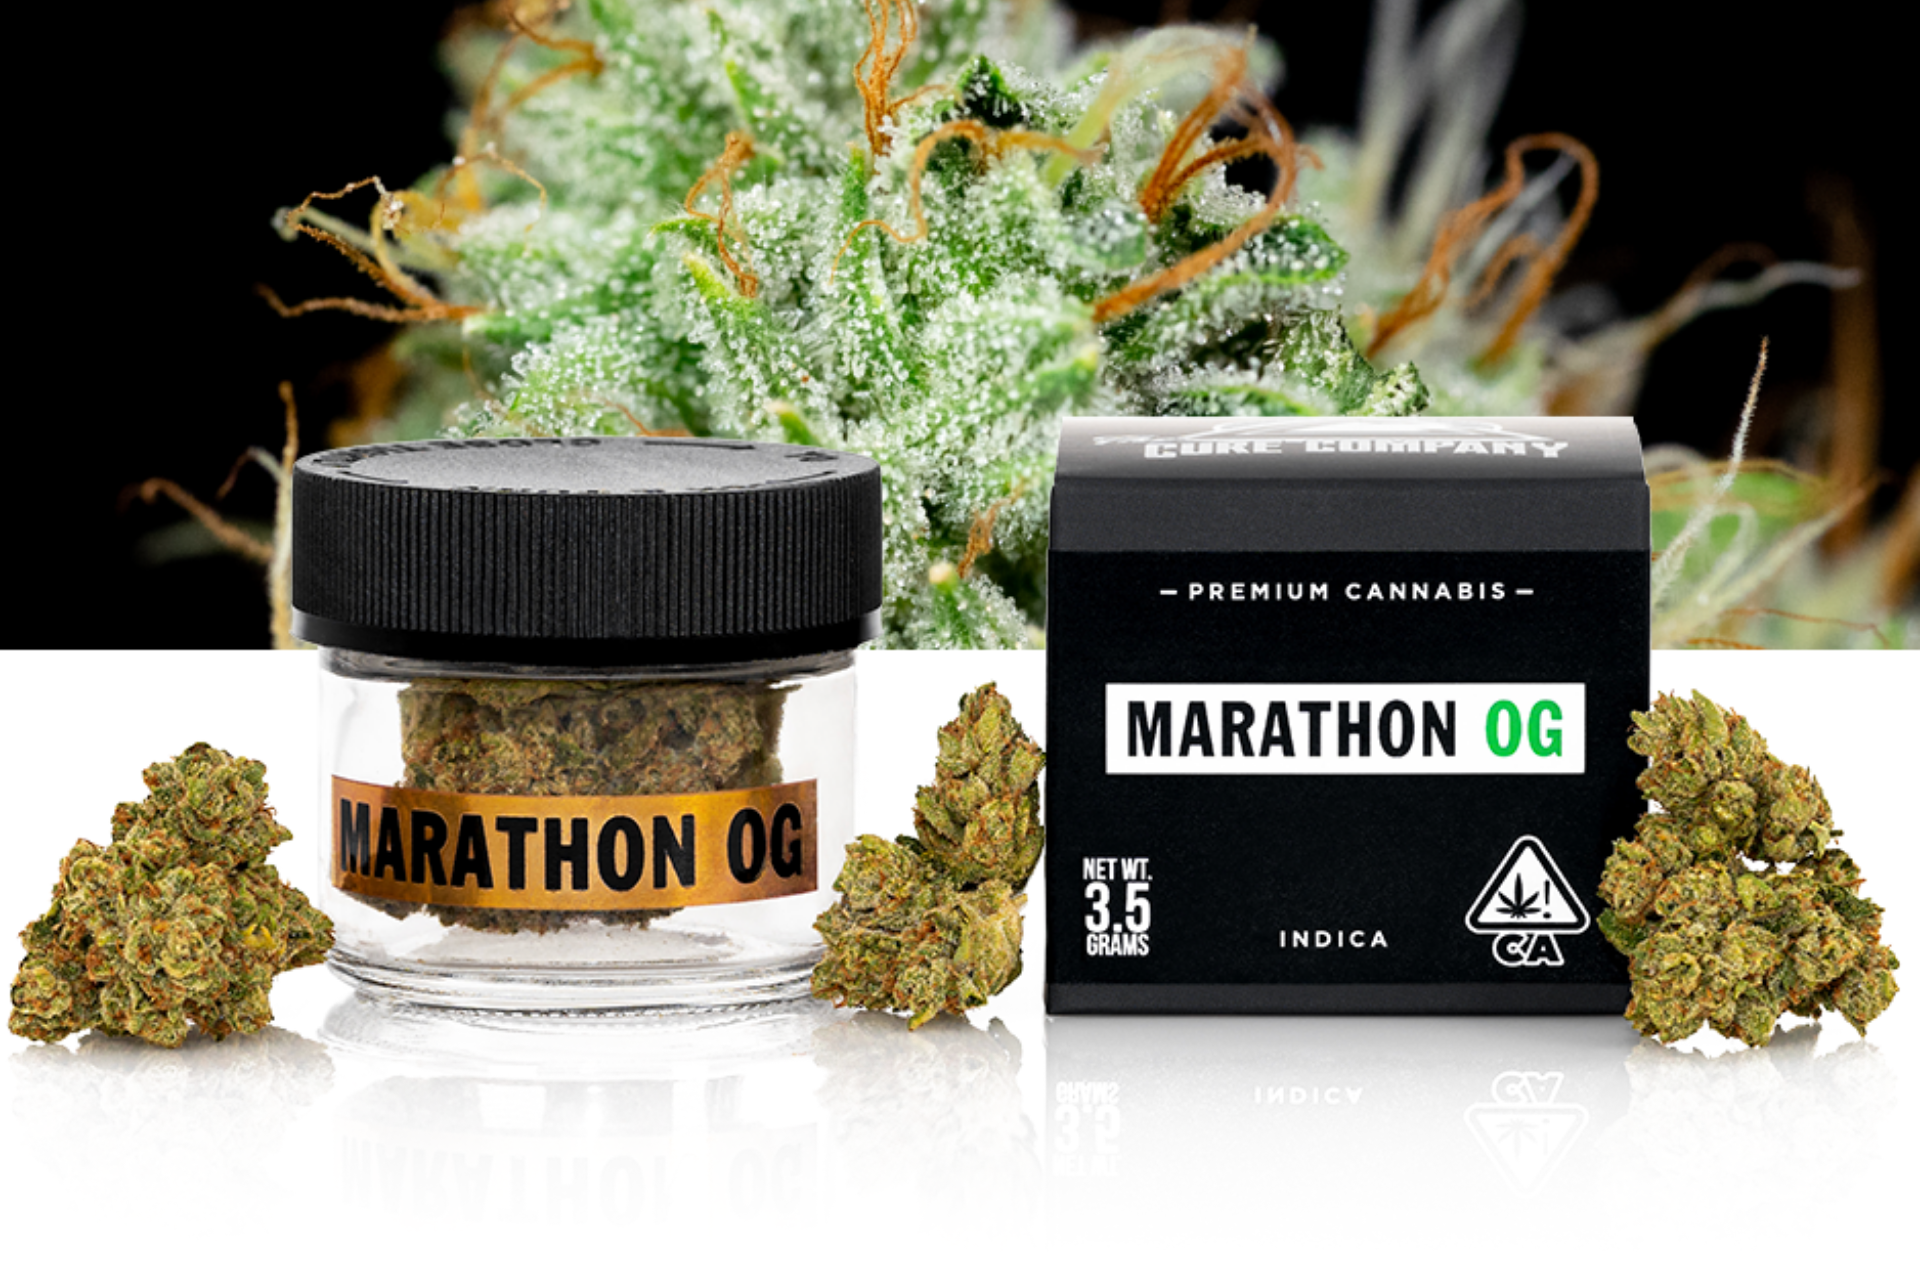 Marathon OG Strain: A Powerful OG Fit For Creatives And Daily Smokers